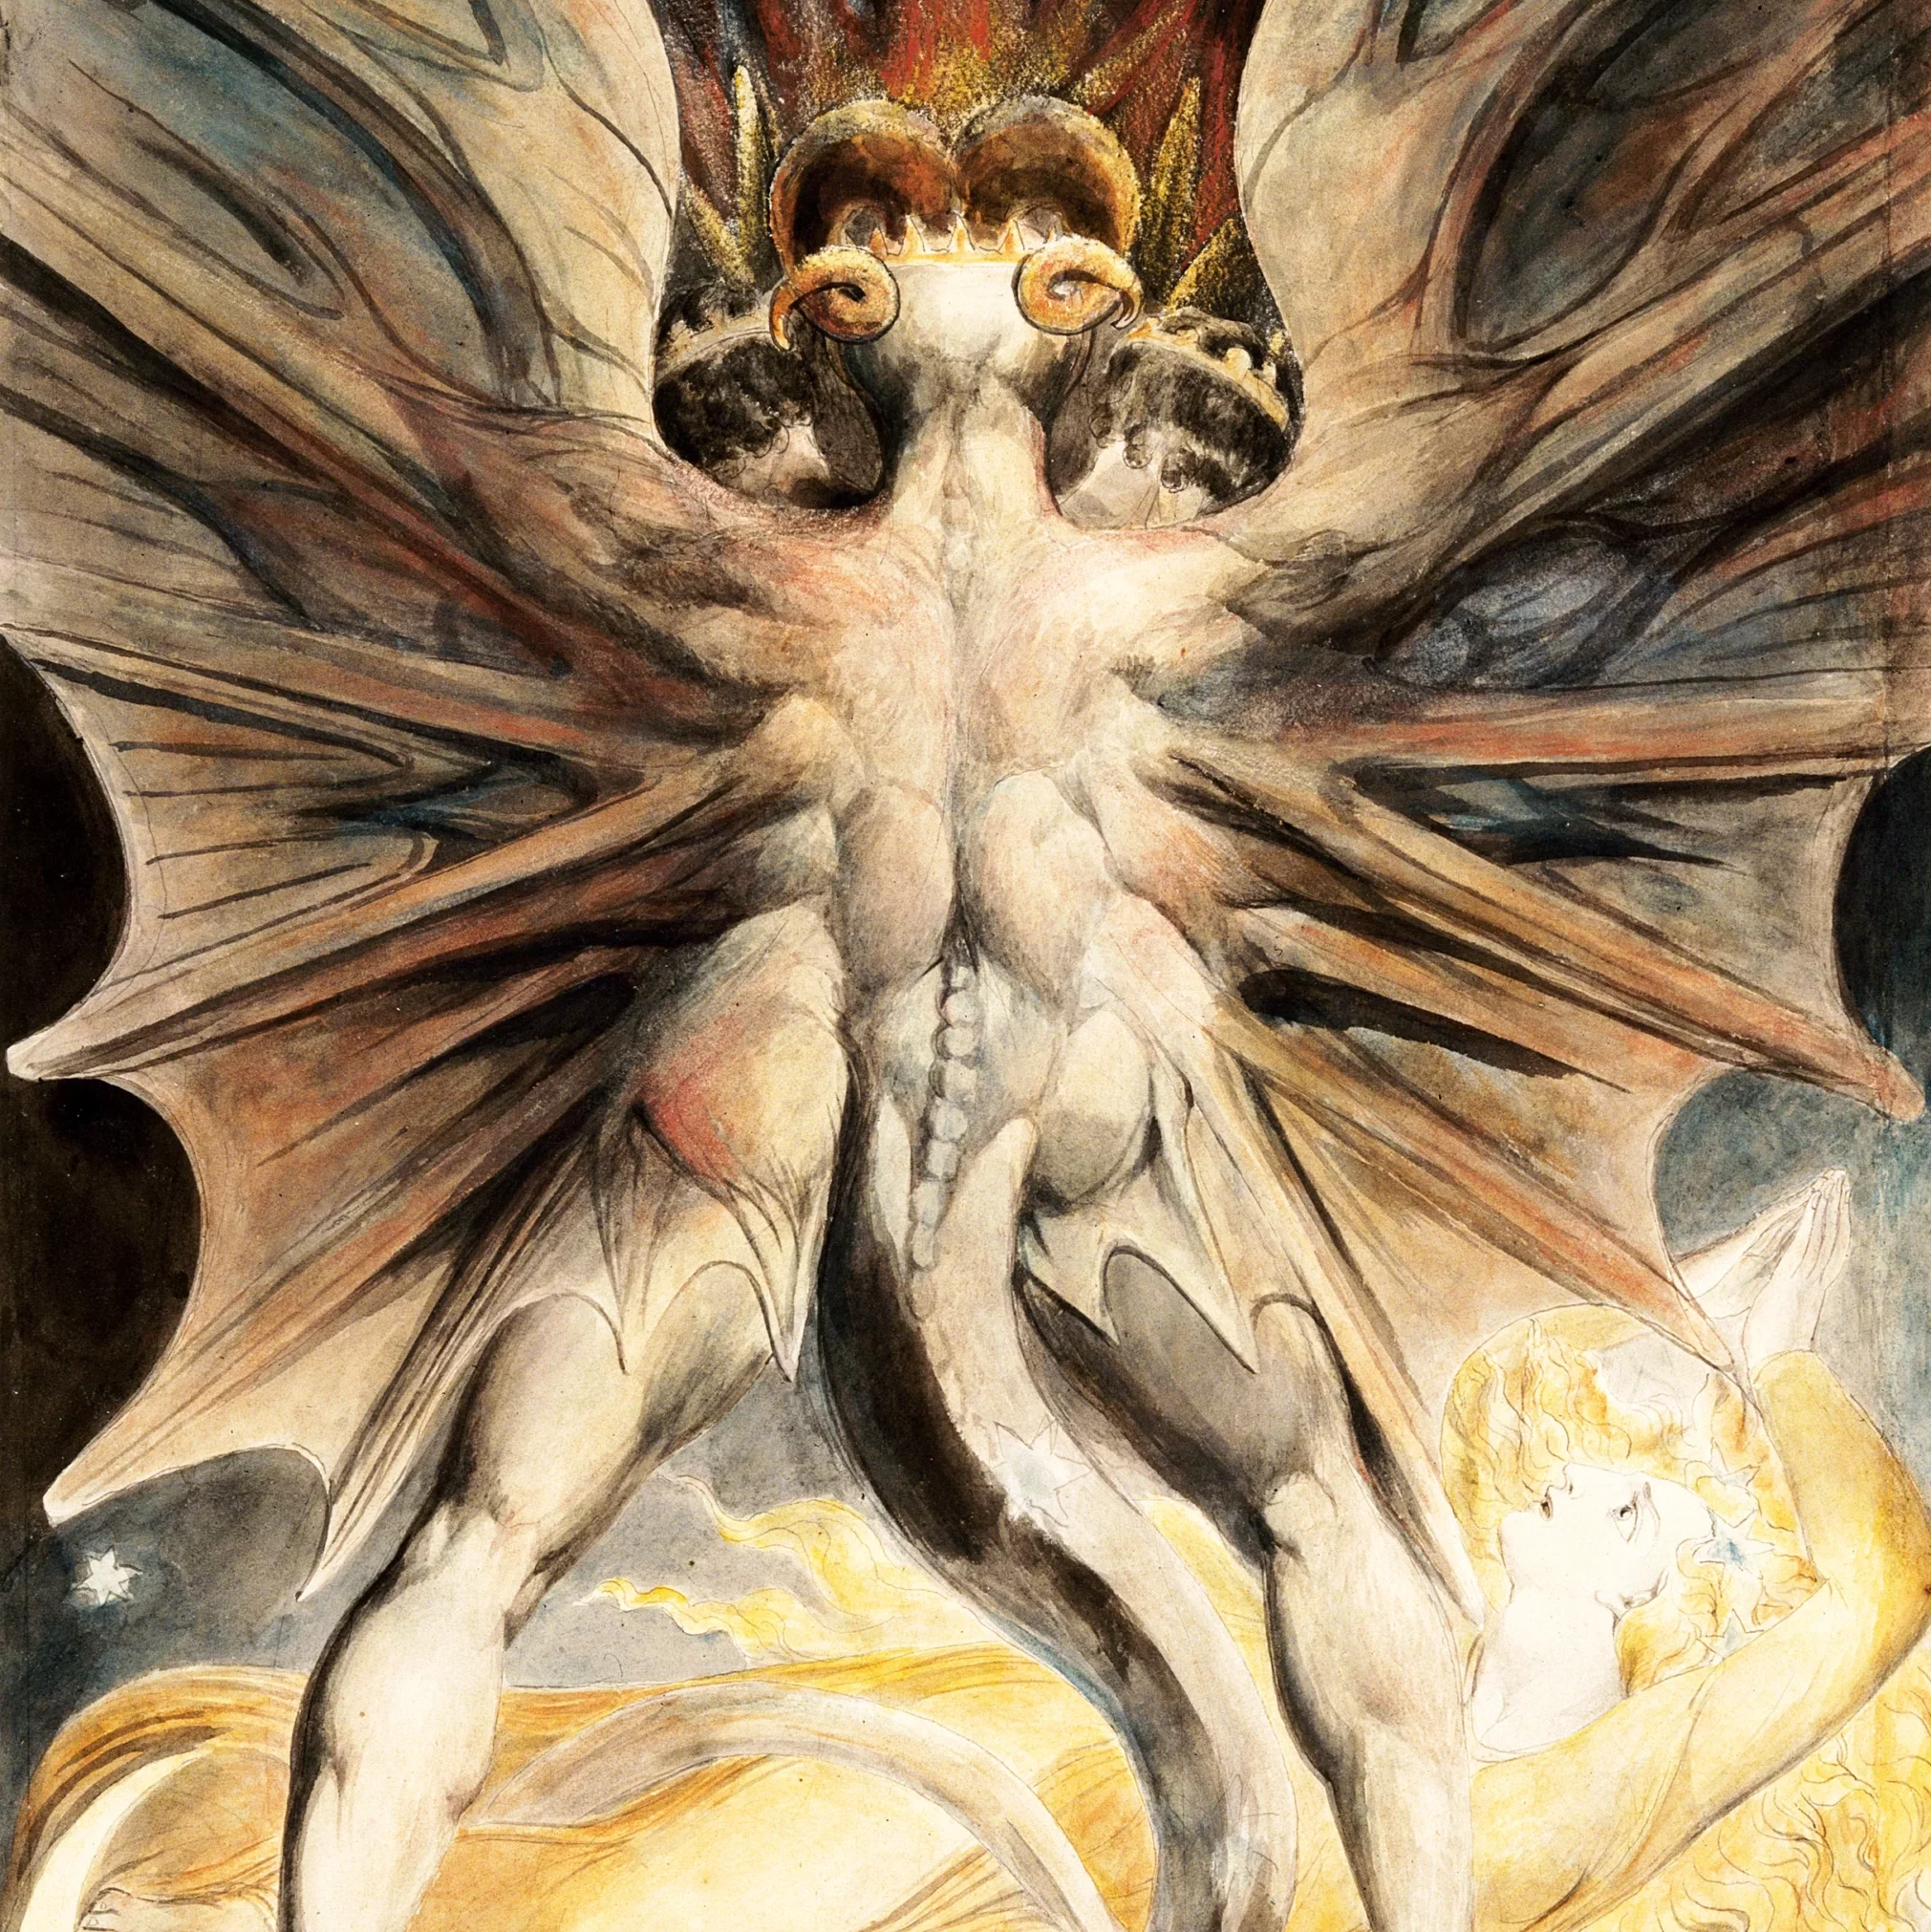 William Blake - Le Grand Dragon Rouge et la femme vêtue de soleil (The Great Red Dragon and the woman clothed in sun), 1803, Brooklyn Museum